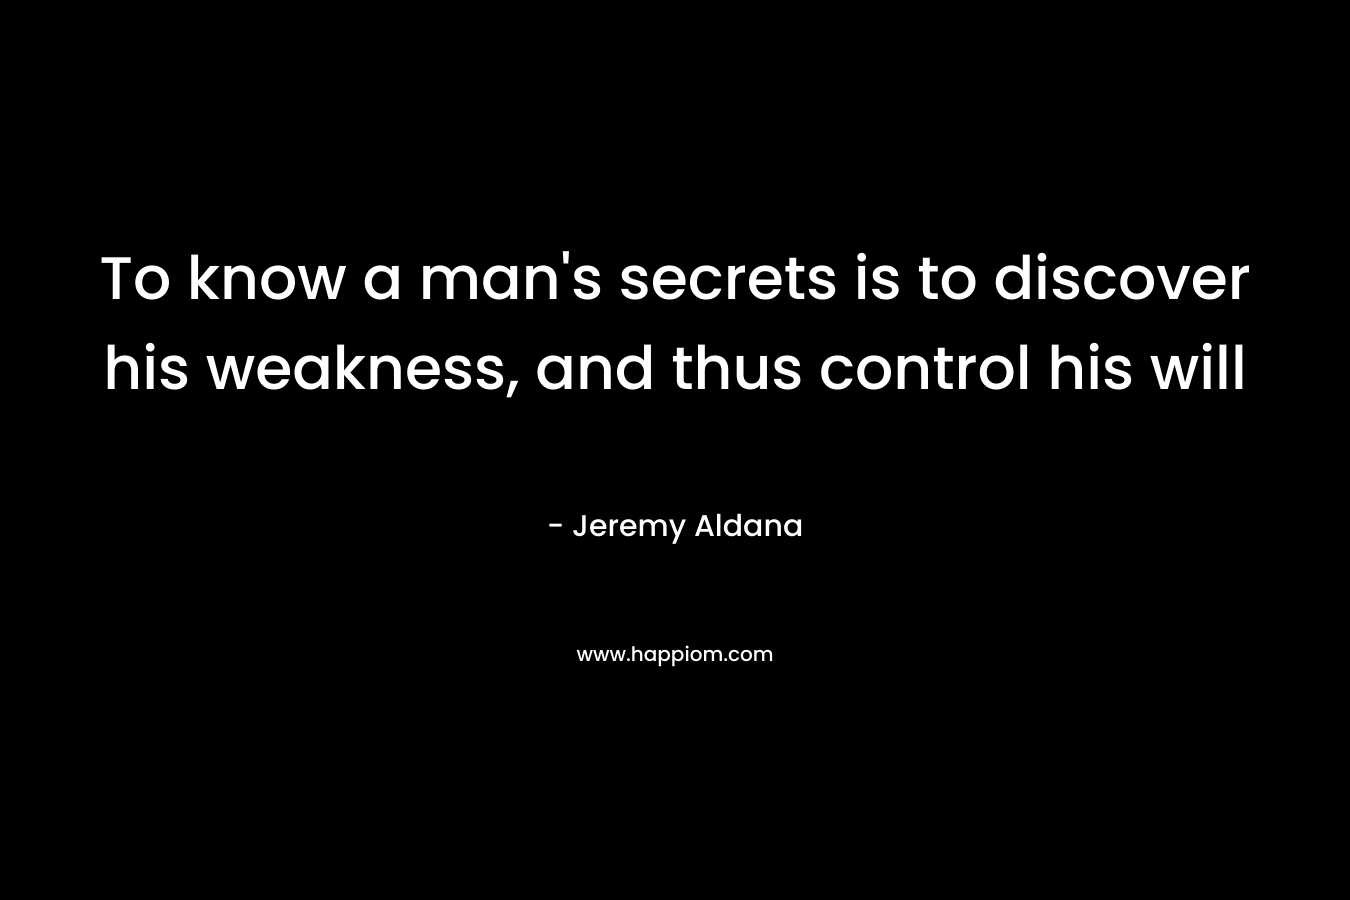 To know a man's secrets is to discover his weakness, and thus control his will